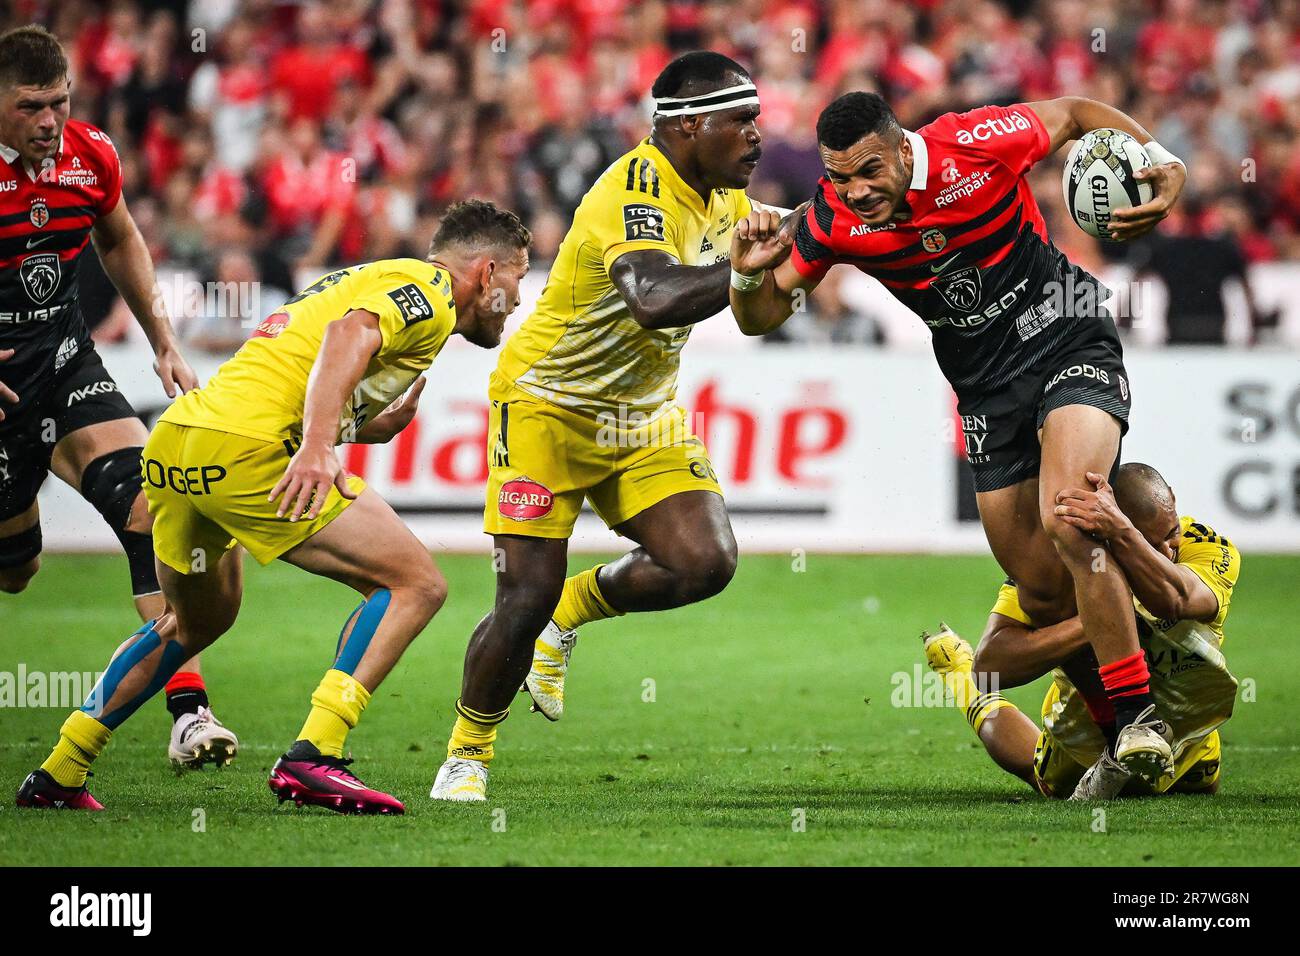 Saint Denis, France. 17th June, 2023. Levani BOTIA VEIVUKE of La Rochelle and Matthis LEBEL of Toulouse during the French championship Top 14 rugby union Final match between Stade Toulousain (Toulouse) and Stade Rochelais (La Rochelle) on June 17, 2023 at Stade de France in Saint-Denis, France - Photo Matthieu Mirville/DPPI Credit: DPPI Media/Alamy Live News Stock Photo